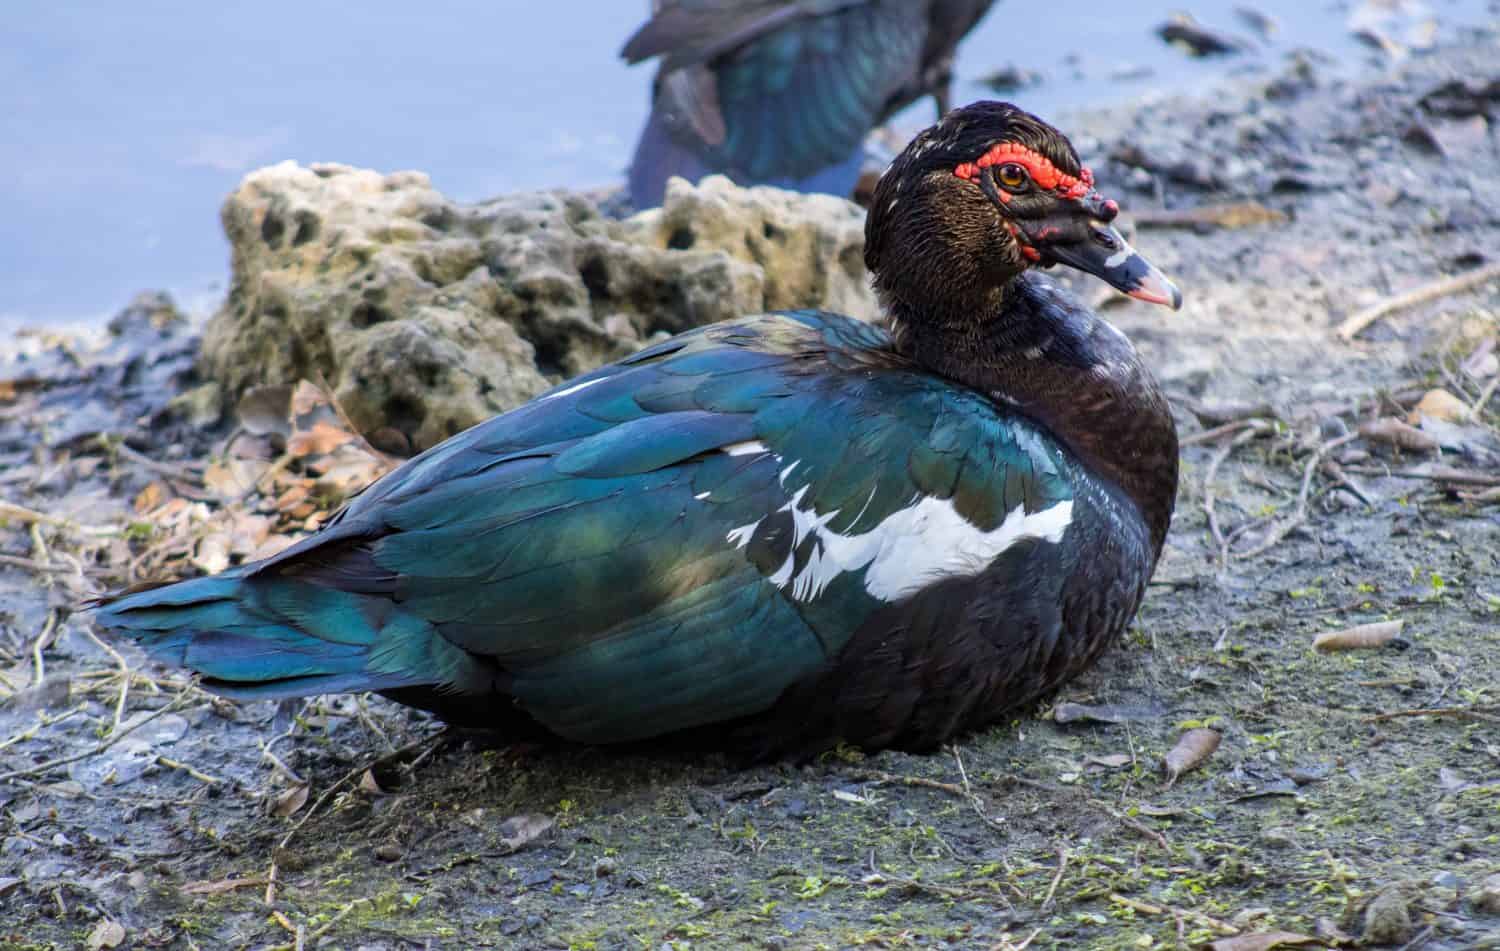 Muscovy duck by the edge of a pond